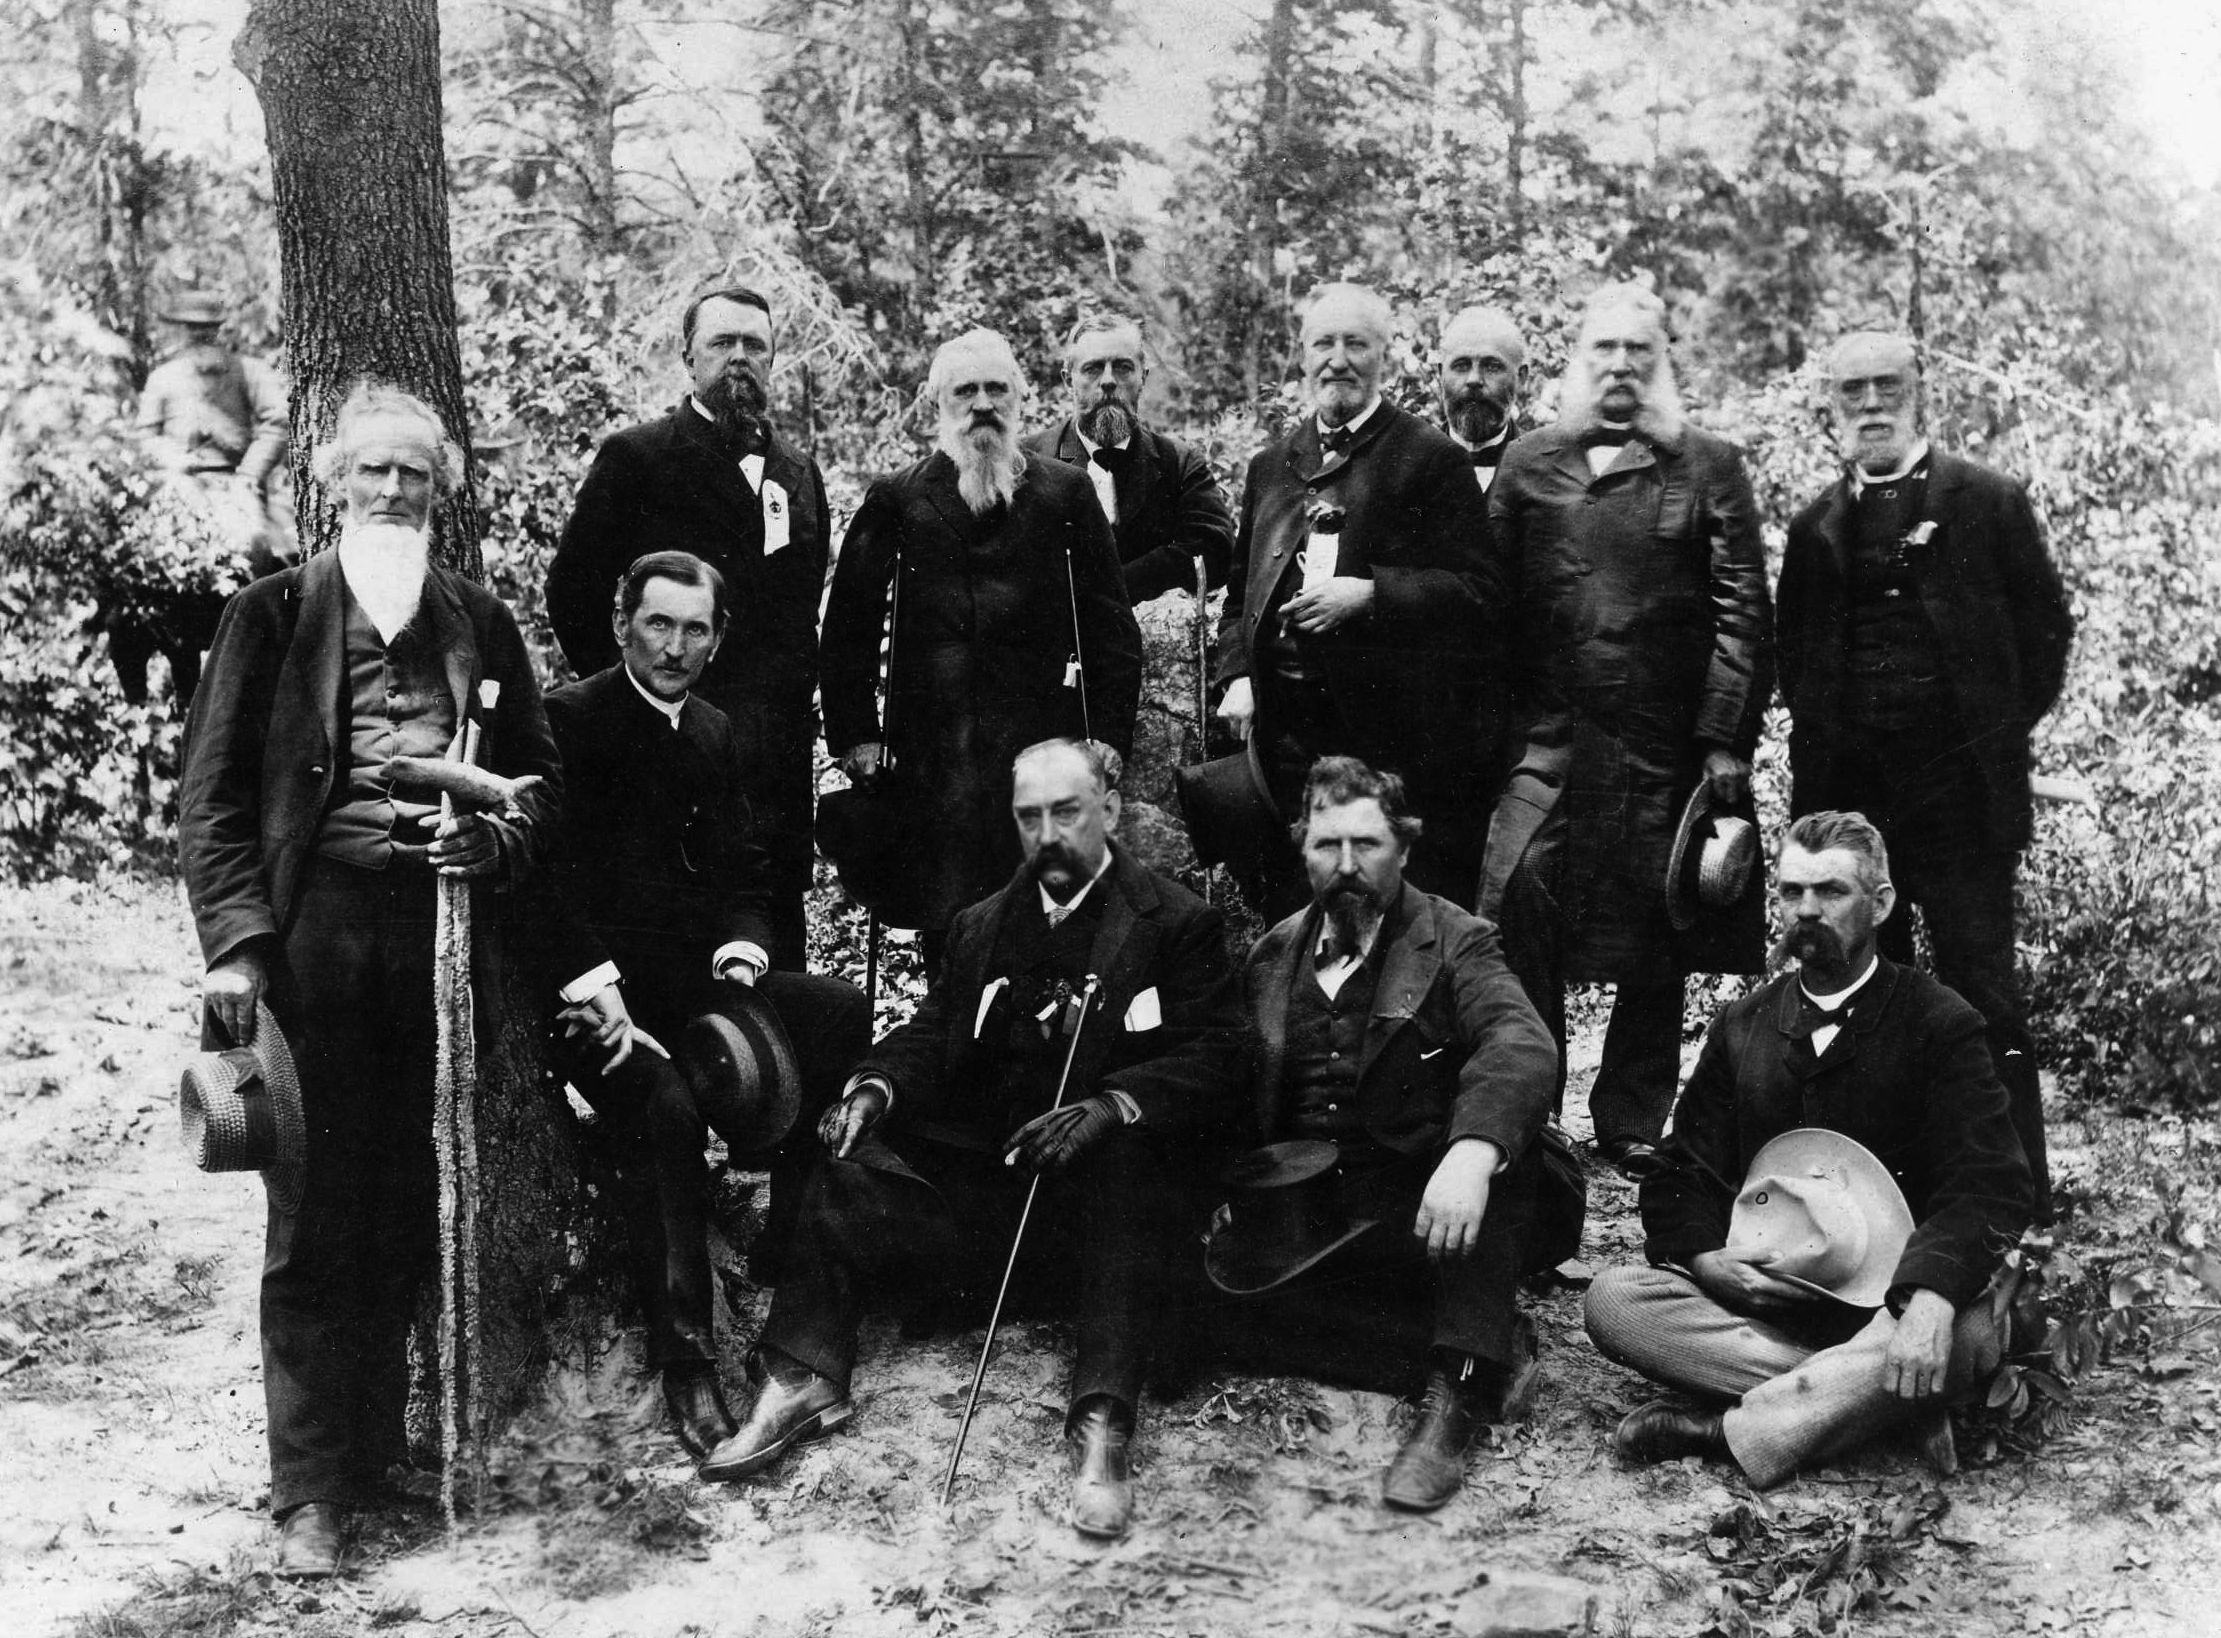 Old Confederates (and one Federal) pose at Chancellorsville in 1884. General James Longstreet stands in the rear, second from the right. Fourth from the right is Union General William Rosecrans, Longstreet’s West Point roommate.